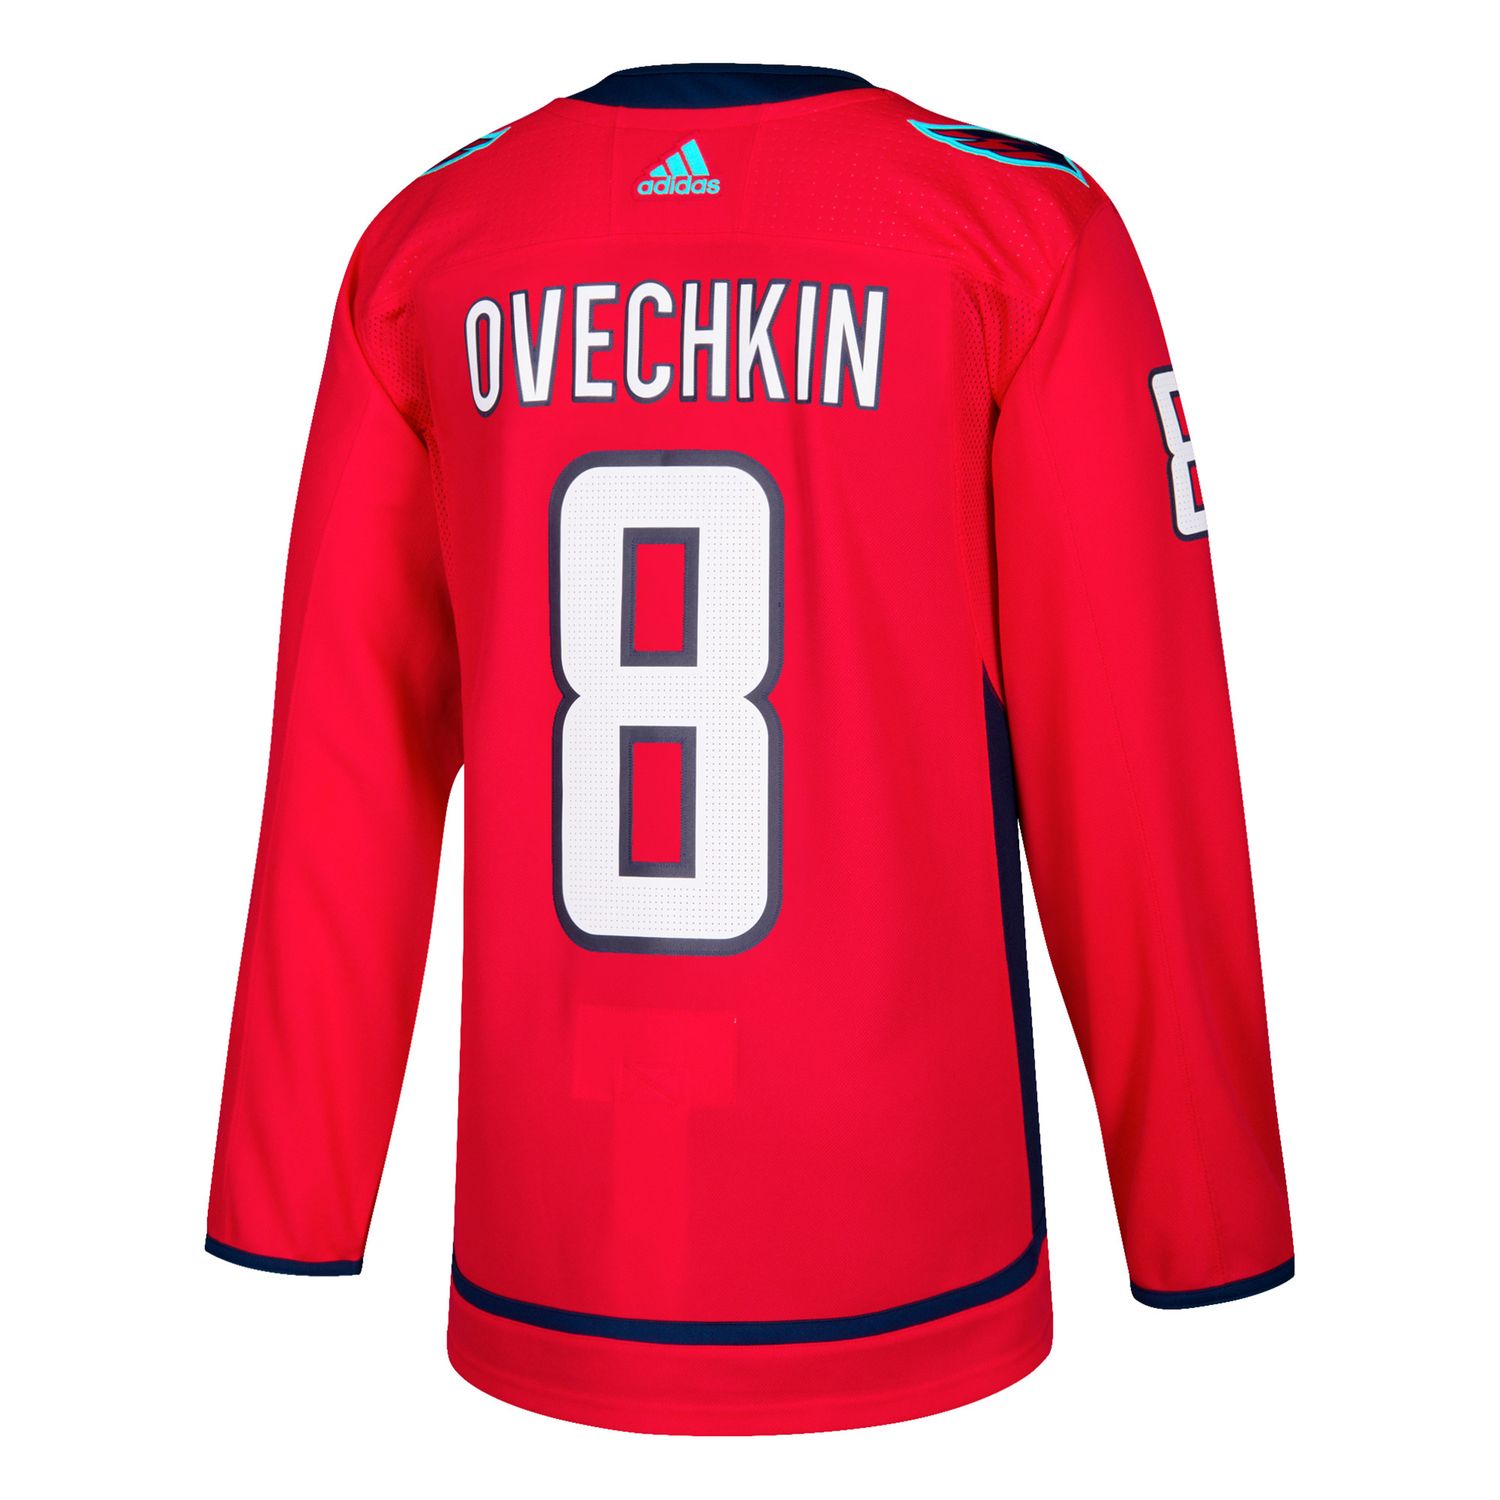 ovechkin jersey for sale